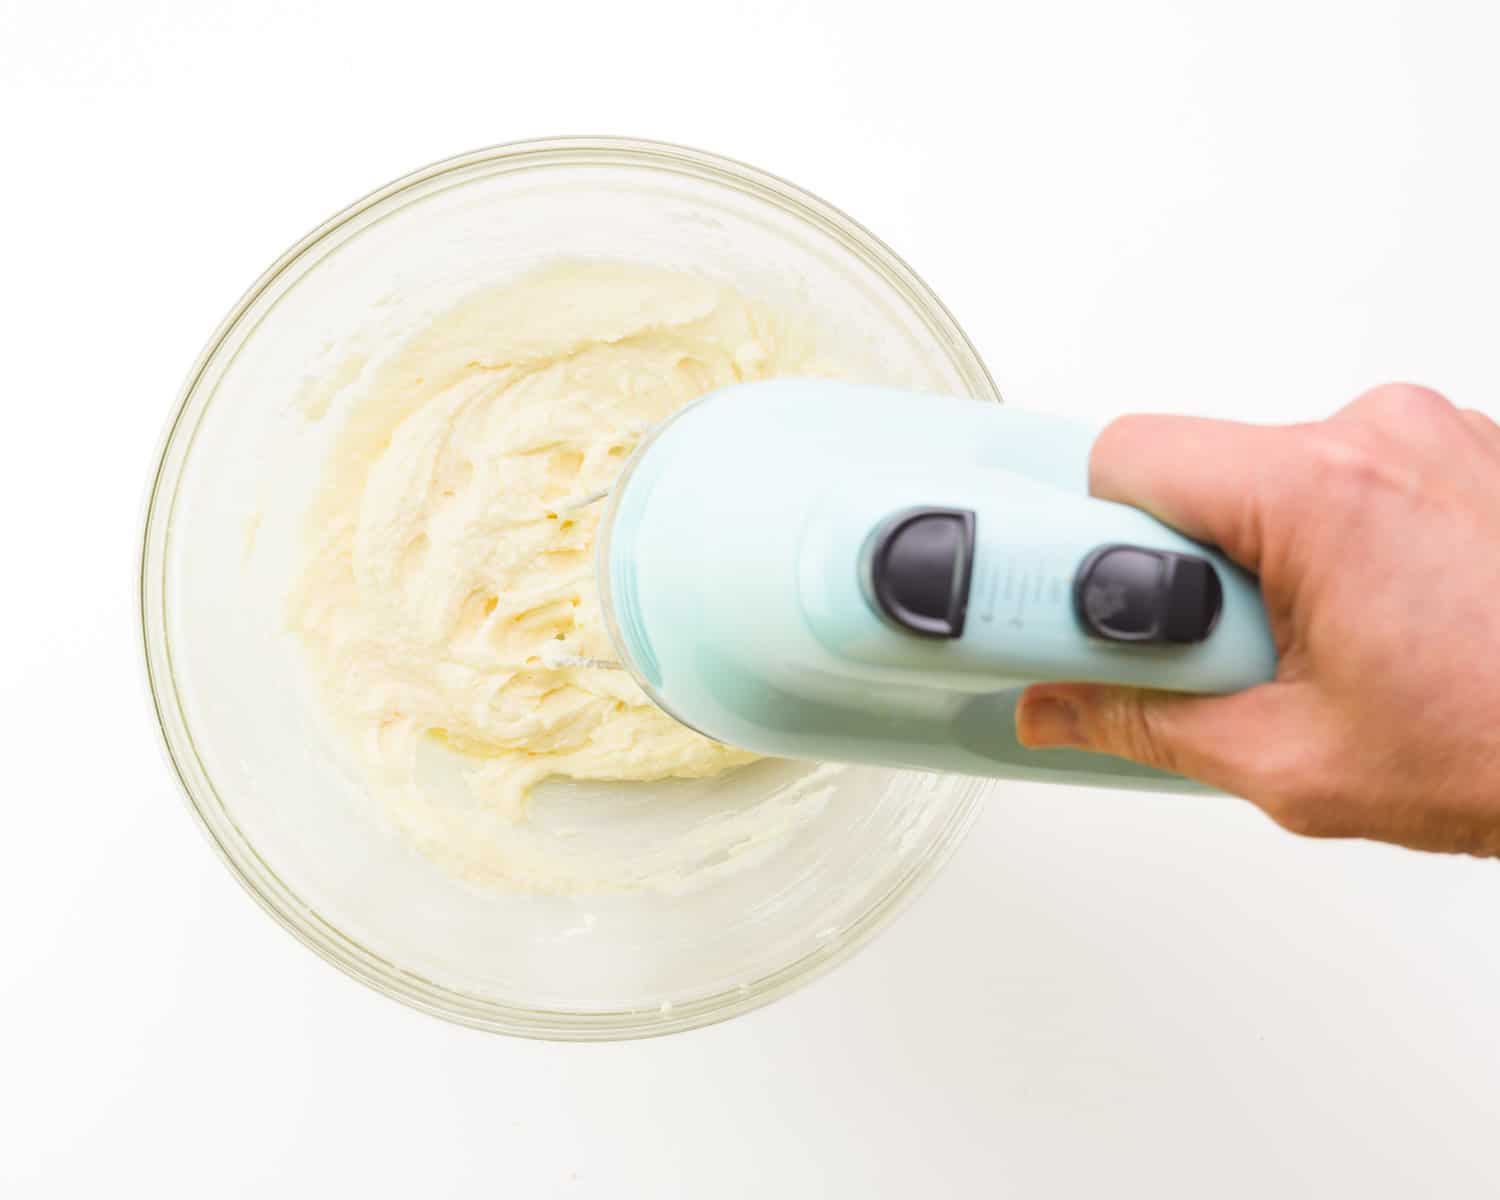 Vegan butter is being creamed with an electric mixer.